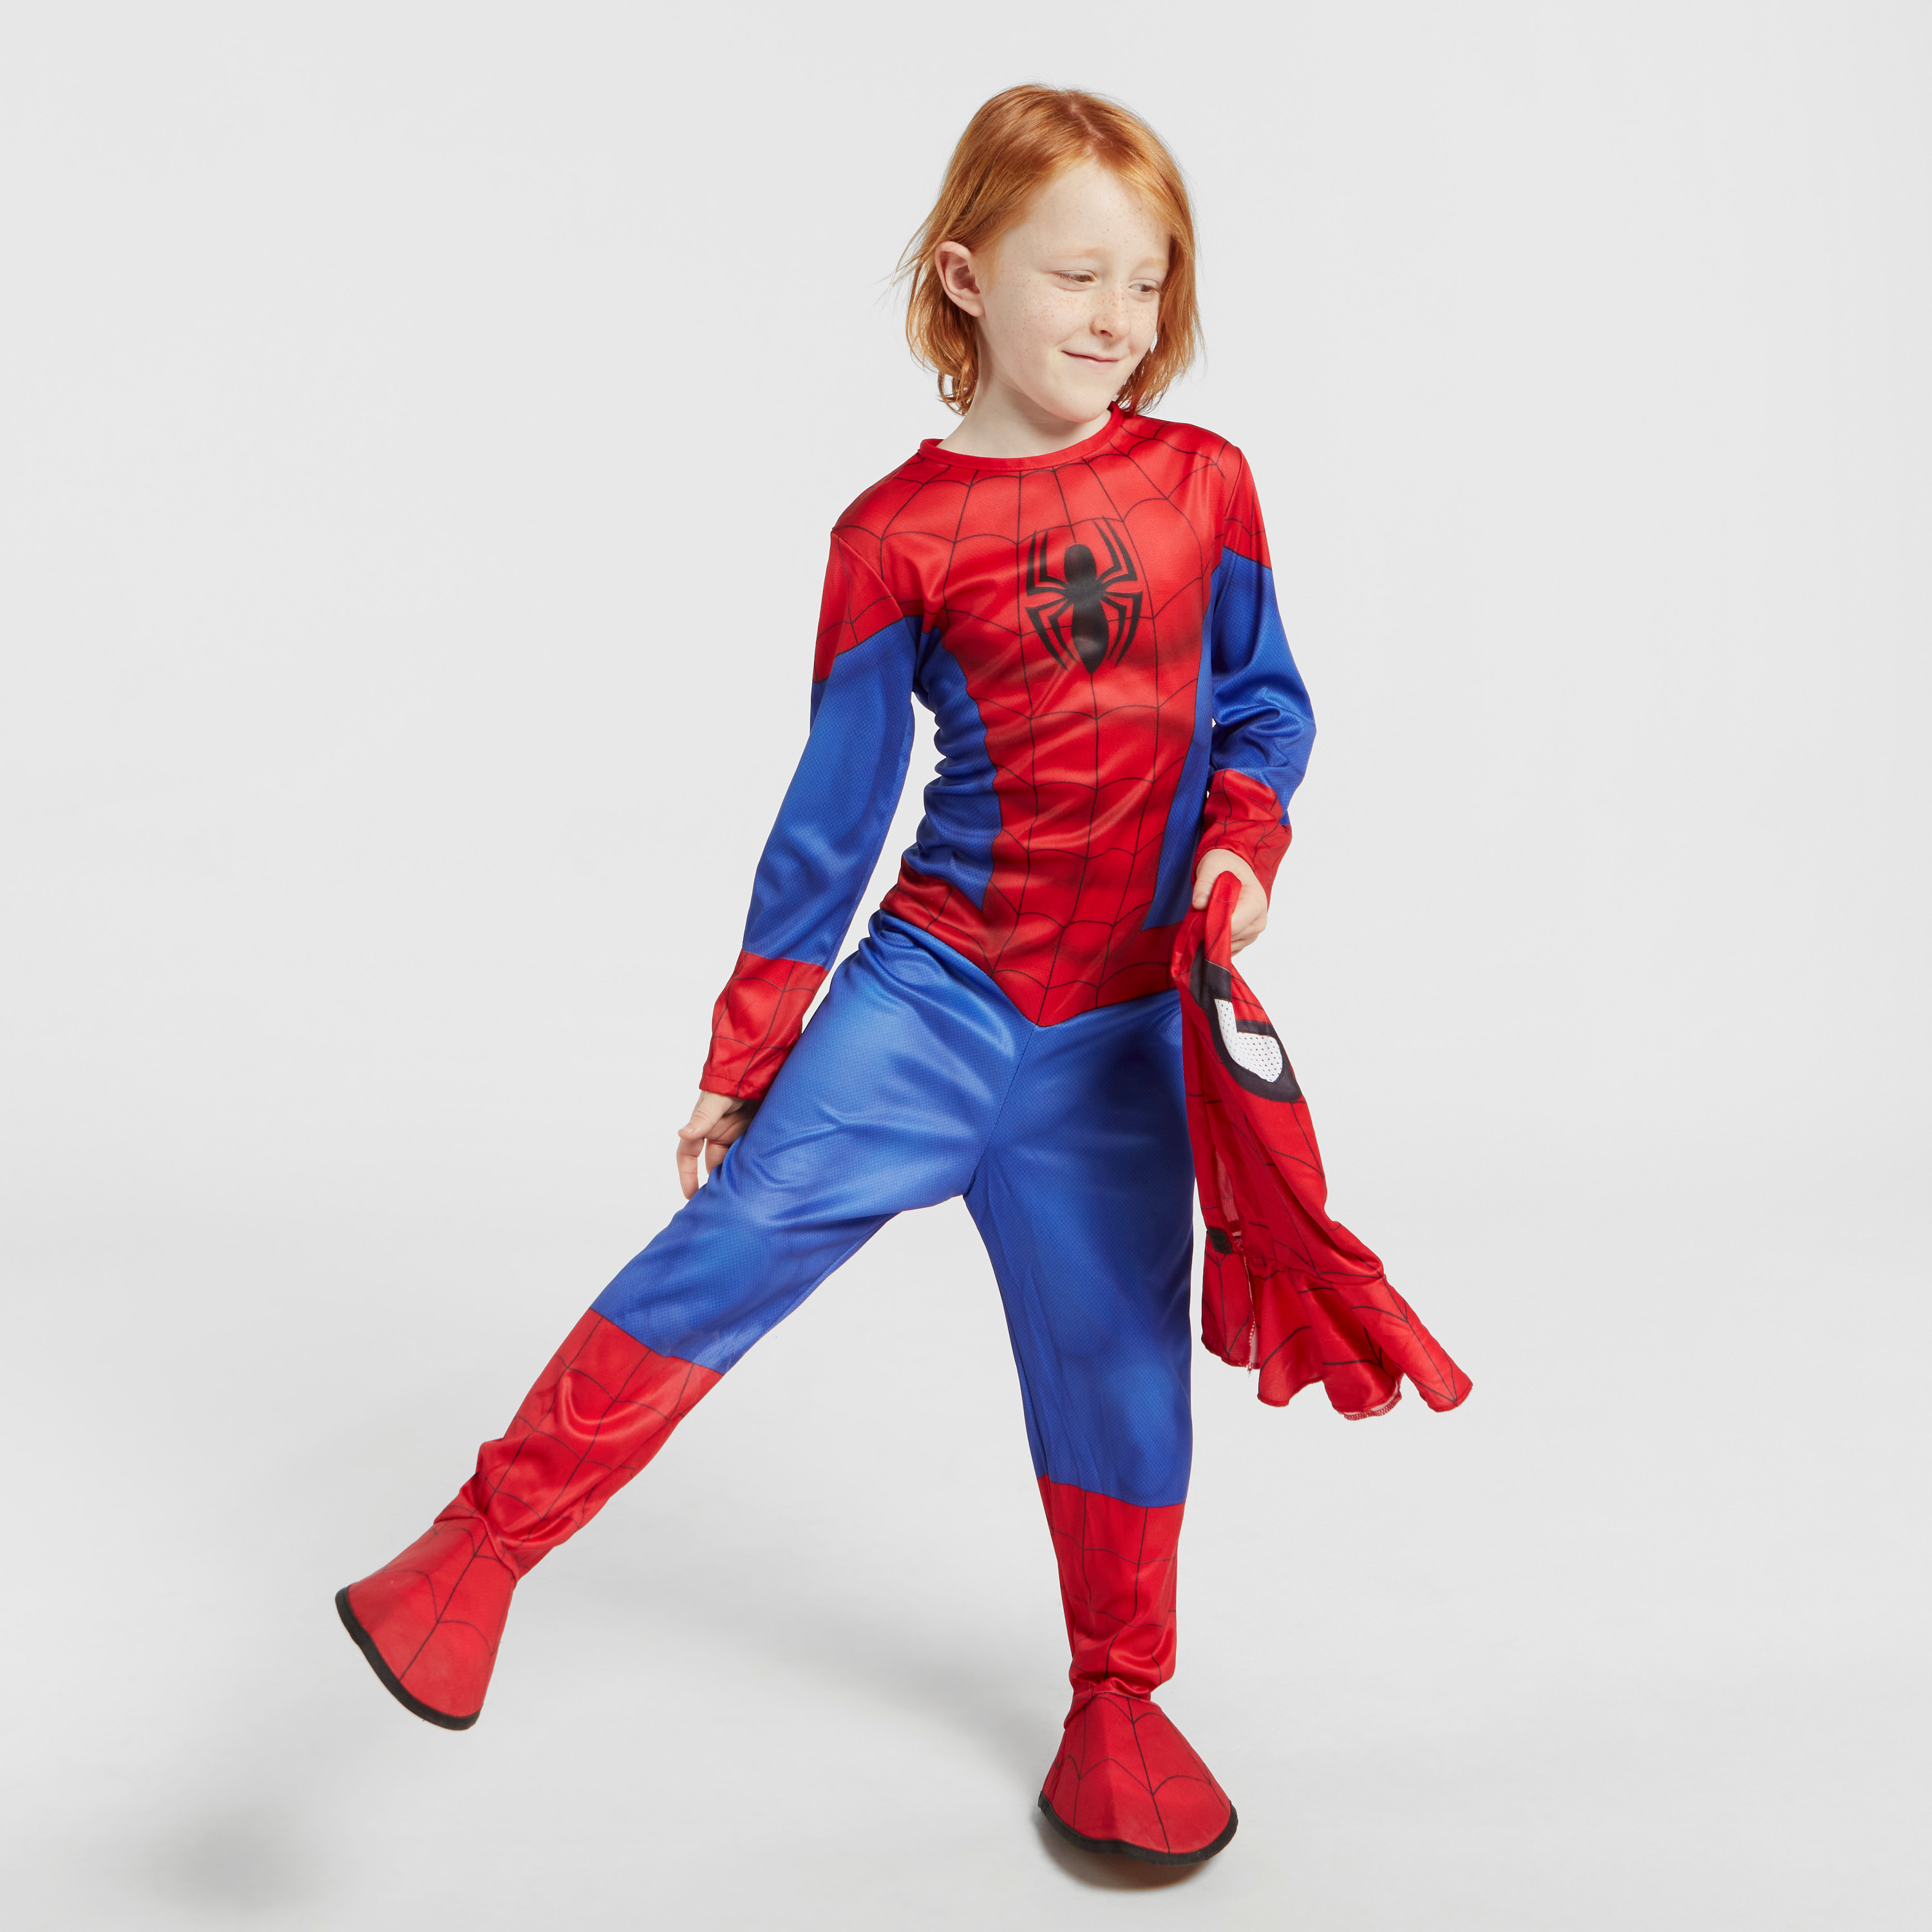 Buy Fancyku Spiderman Dress Bodysuit With Mask For Kids/Adult, Peter Parker Spider  Man Costume Suit, Spandex Spider-Man Toys Suit For Boys Teens  Halloween,Cosplay,Party (Suit For Height 160Cm),Multicolor Online at Low  Prices in